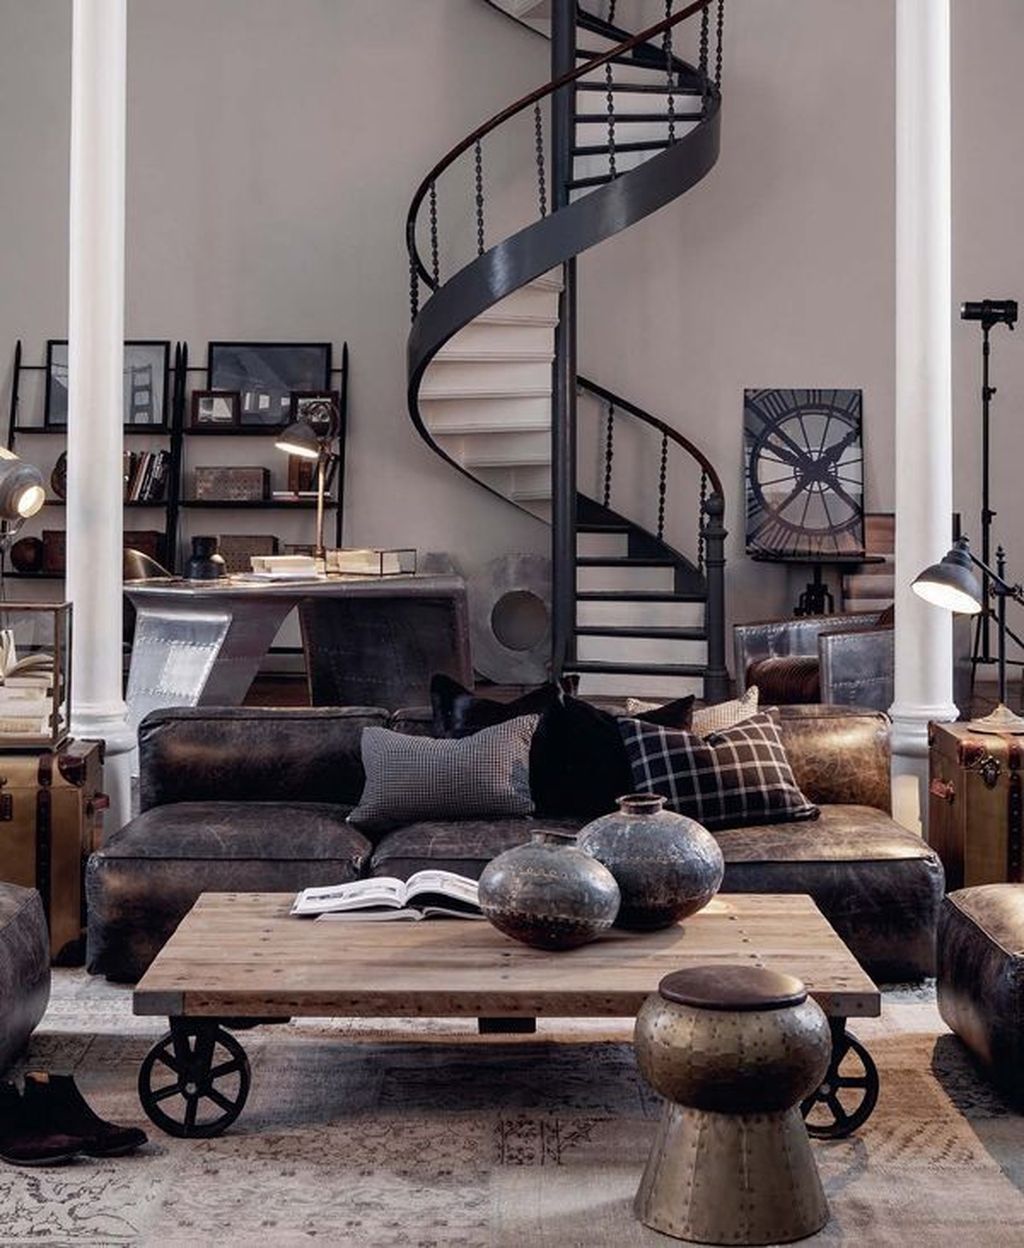 Fabulous Industrial Loft Make Over Ideas For Trendy Home 40